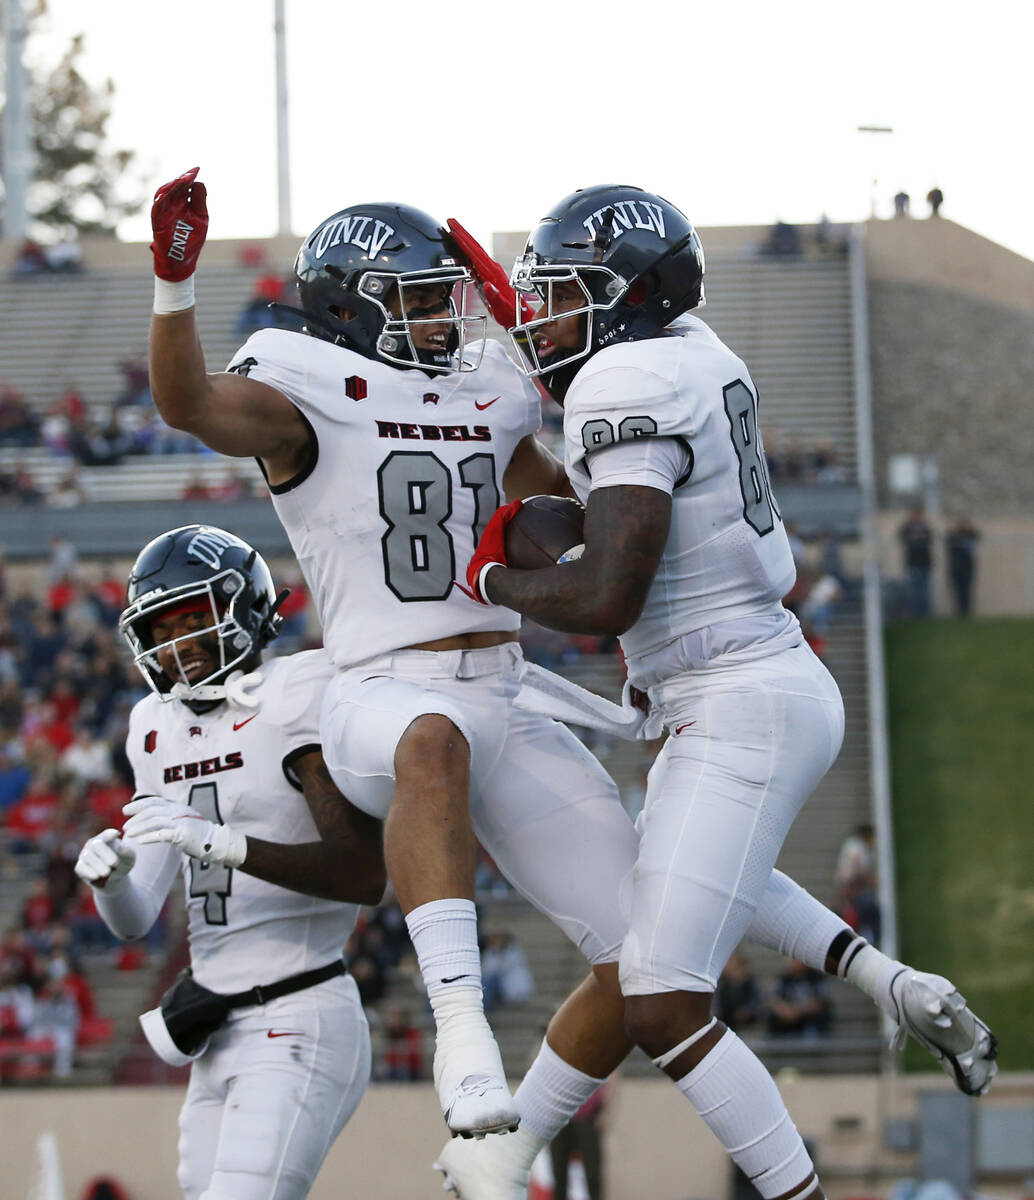 UNLV wide receiver Marcus Phillips Jr. (86) celebrates with tight end Kue Olotoa (81) after sco ...